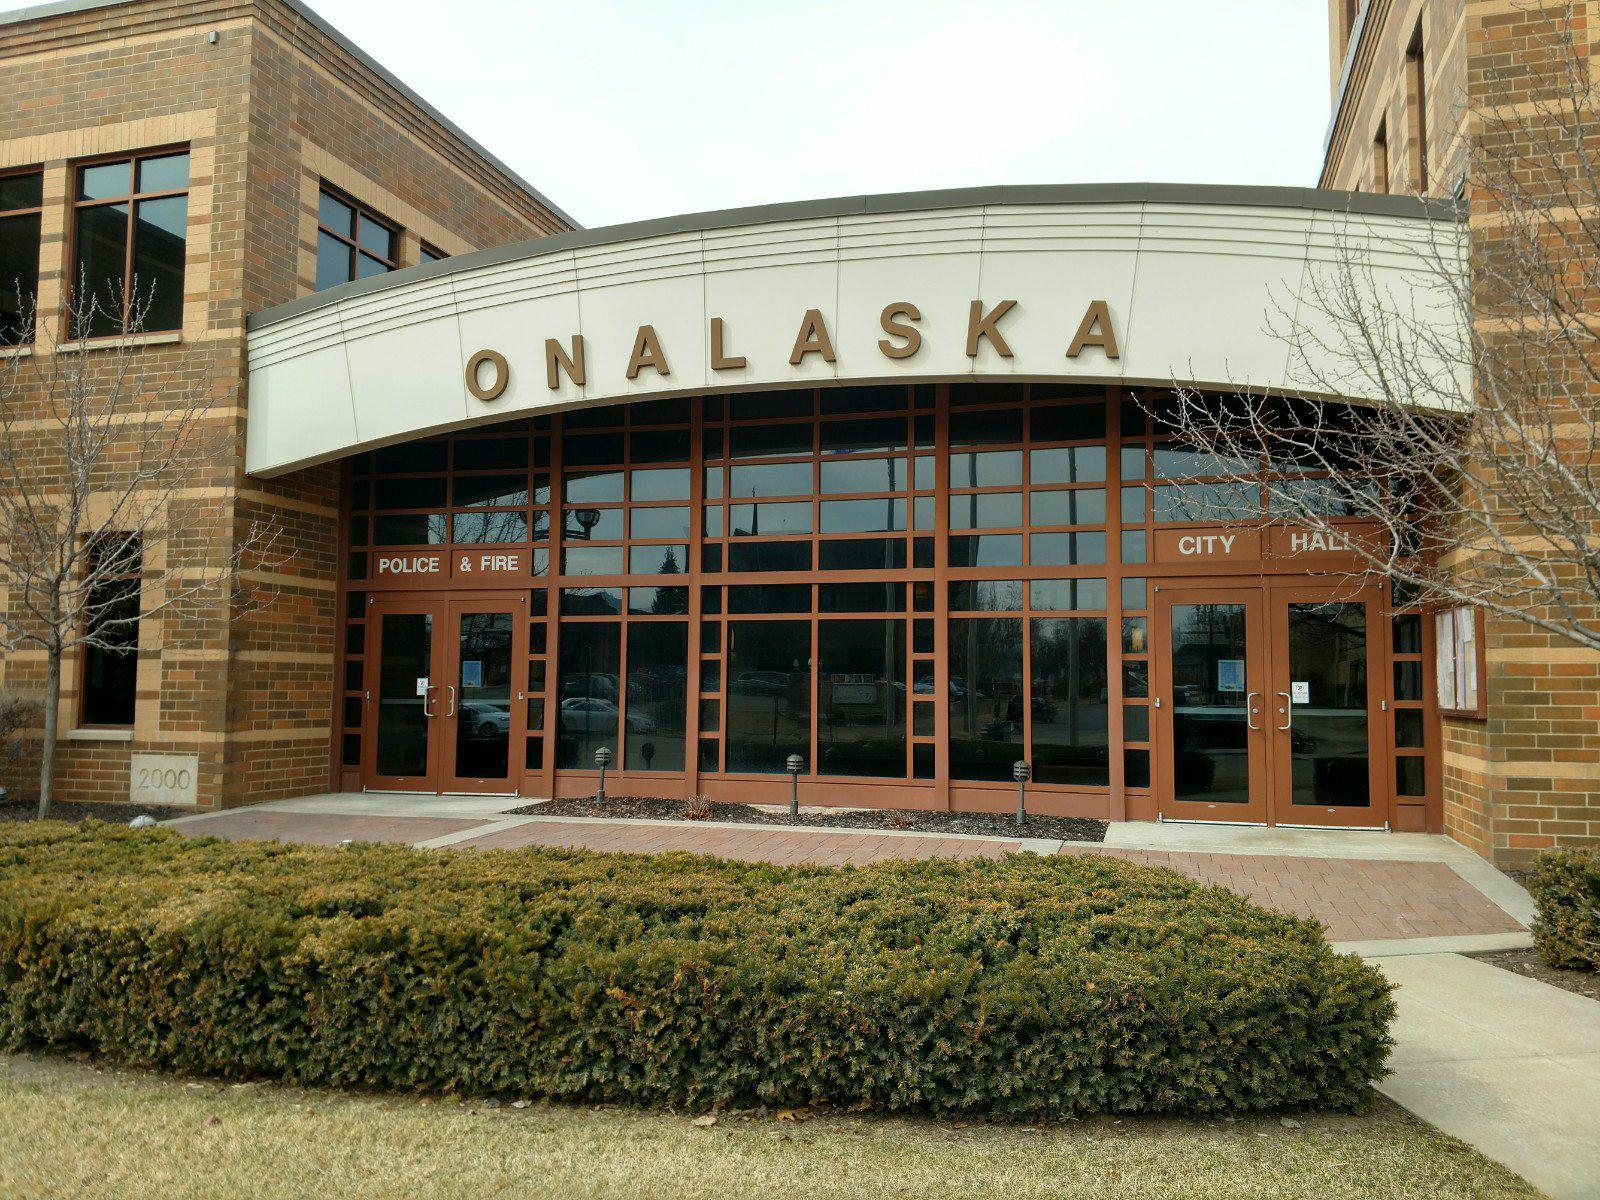 Onalaska supports area guidelines for permitting larger gatherings